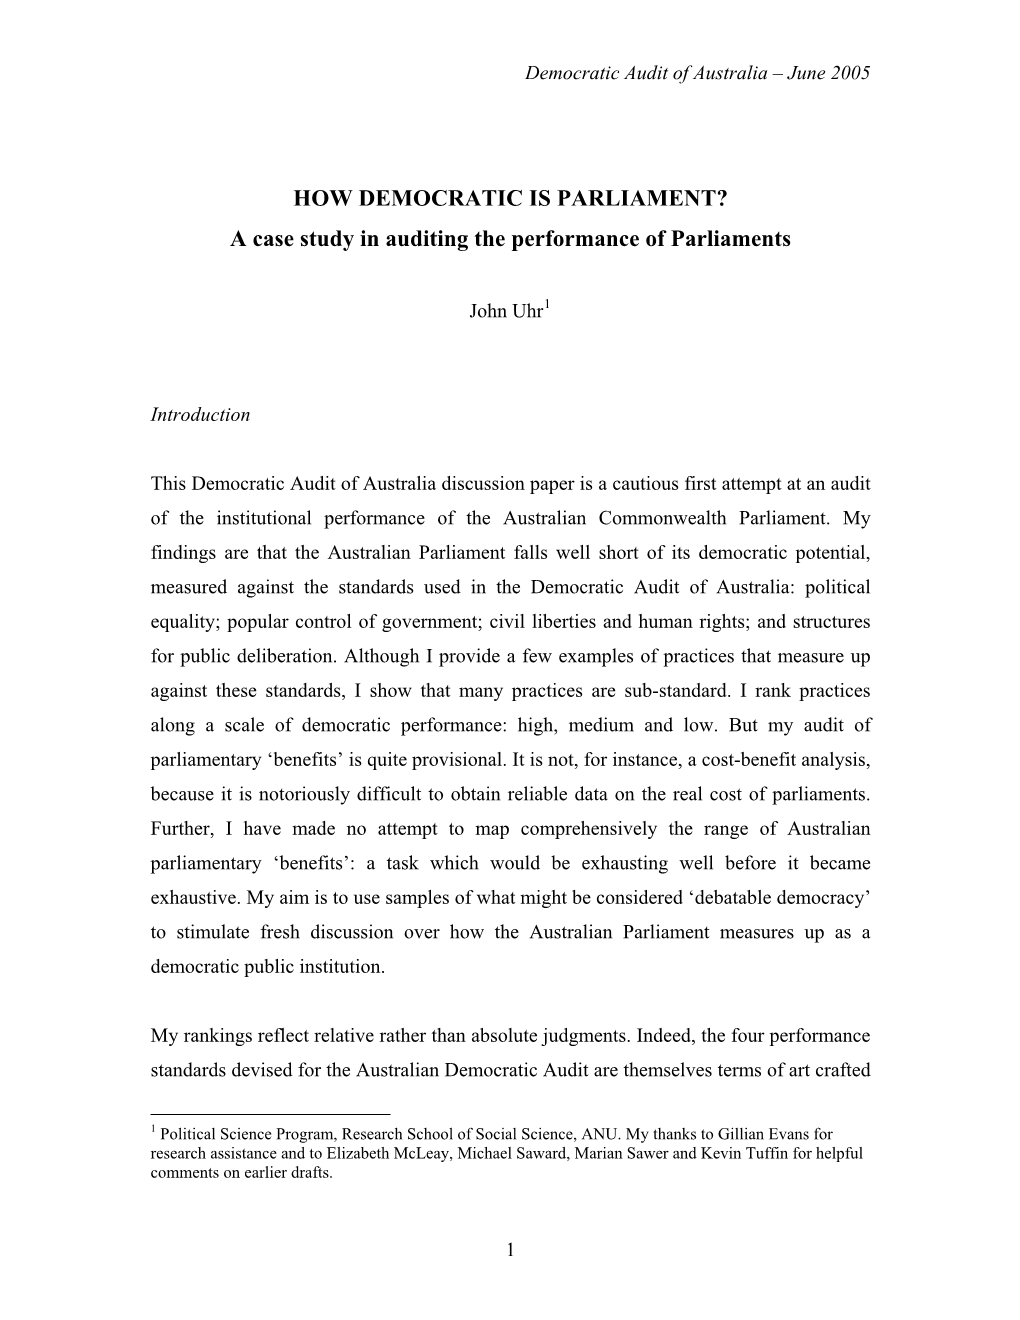 HOW DEMOCRATIC IS PARLIAMENT? a Case Study in Auditing the Performance of Parliaments